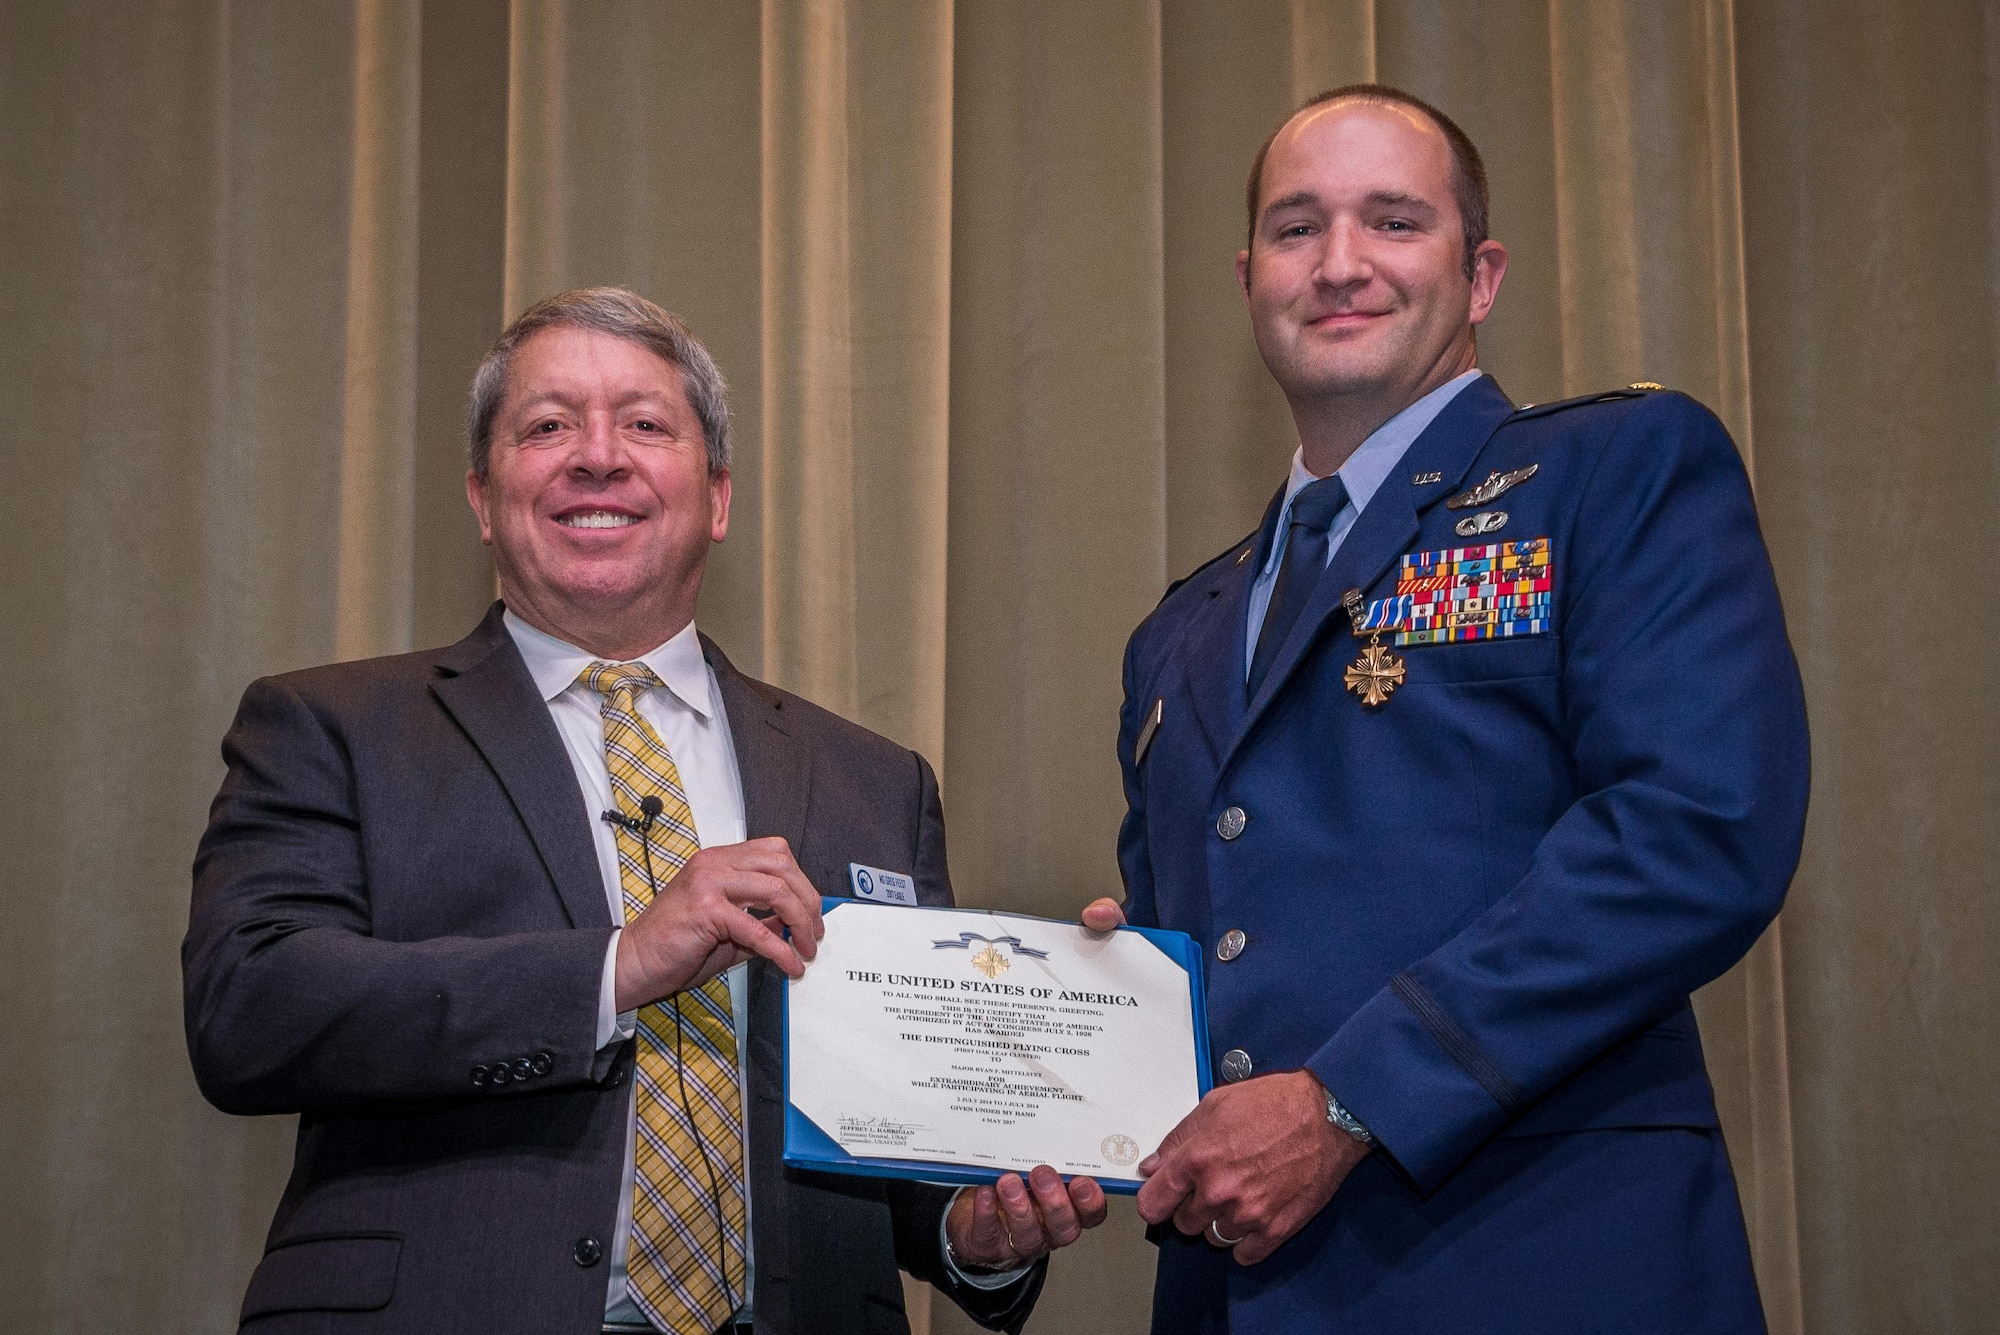 Retired Air Force Maj. Gen. Gregory A. Feest awards Air Command and Staff College student Maj. Ryan Mittelstet the Distinguished Flying Cross with Valor for his heroism in combat, May 30, 2017. Feest is one of the Eagles for the Gathering of the Eagles 2017. The GOE program brings together aviation heroes and pioneers to share their experiences and provide inspiration to future aviation leaders. Feest was a command pilot with more than 5,600 flying hours, including more than 800 combat hours earned during operations: Just Cause; Desert Storm; Iraqi Freedom; and Enduring Freedom. (U.S. Air Force Photo/ Donna L. Burnett/Released)